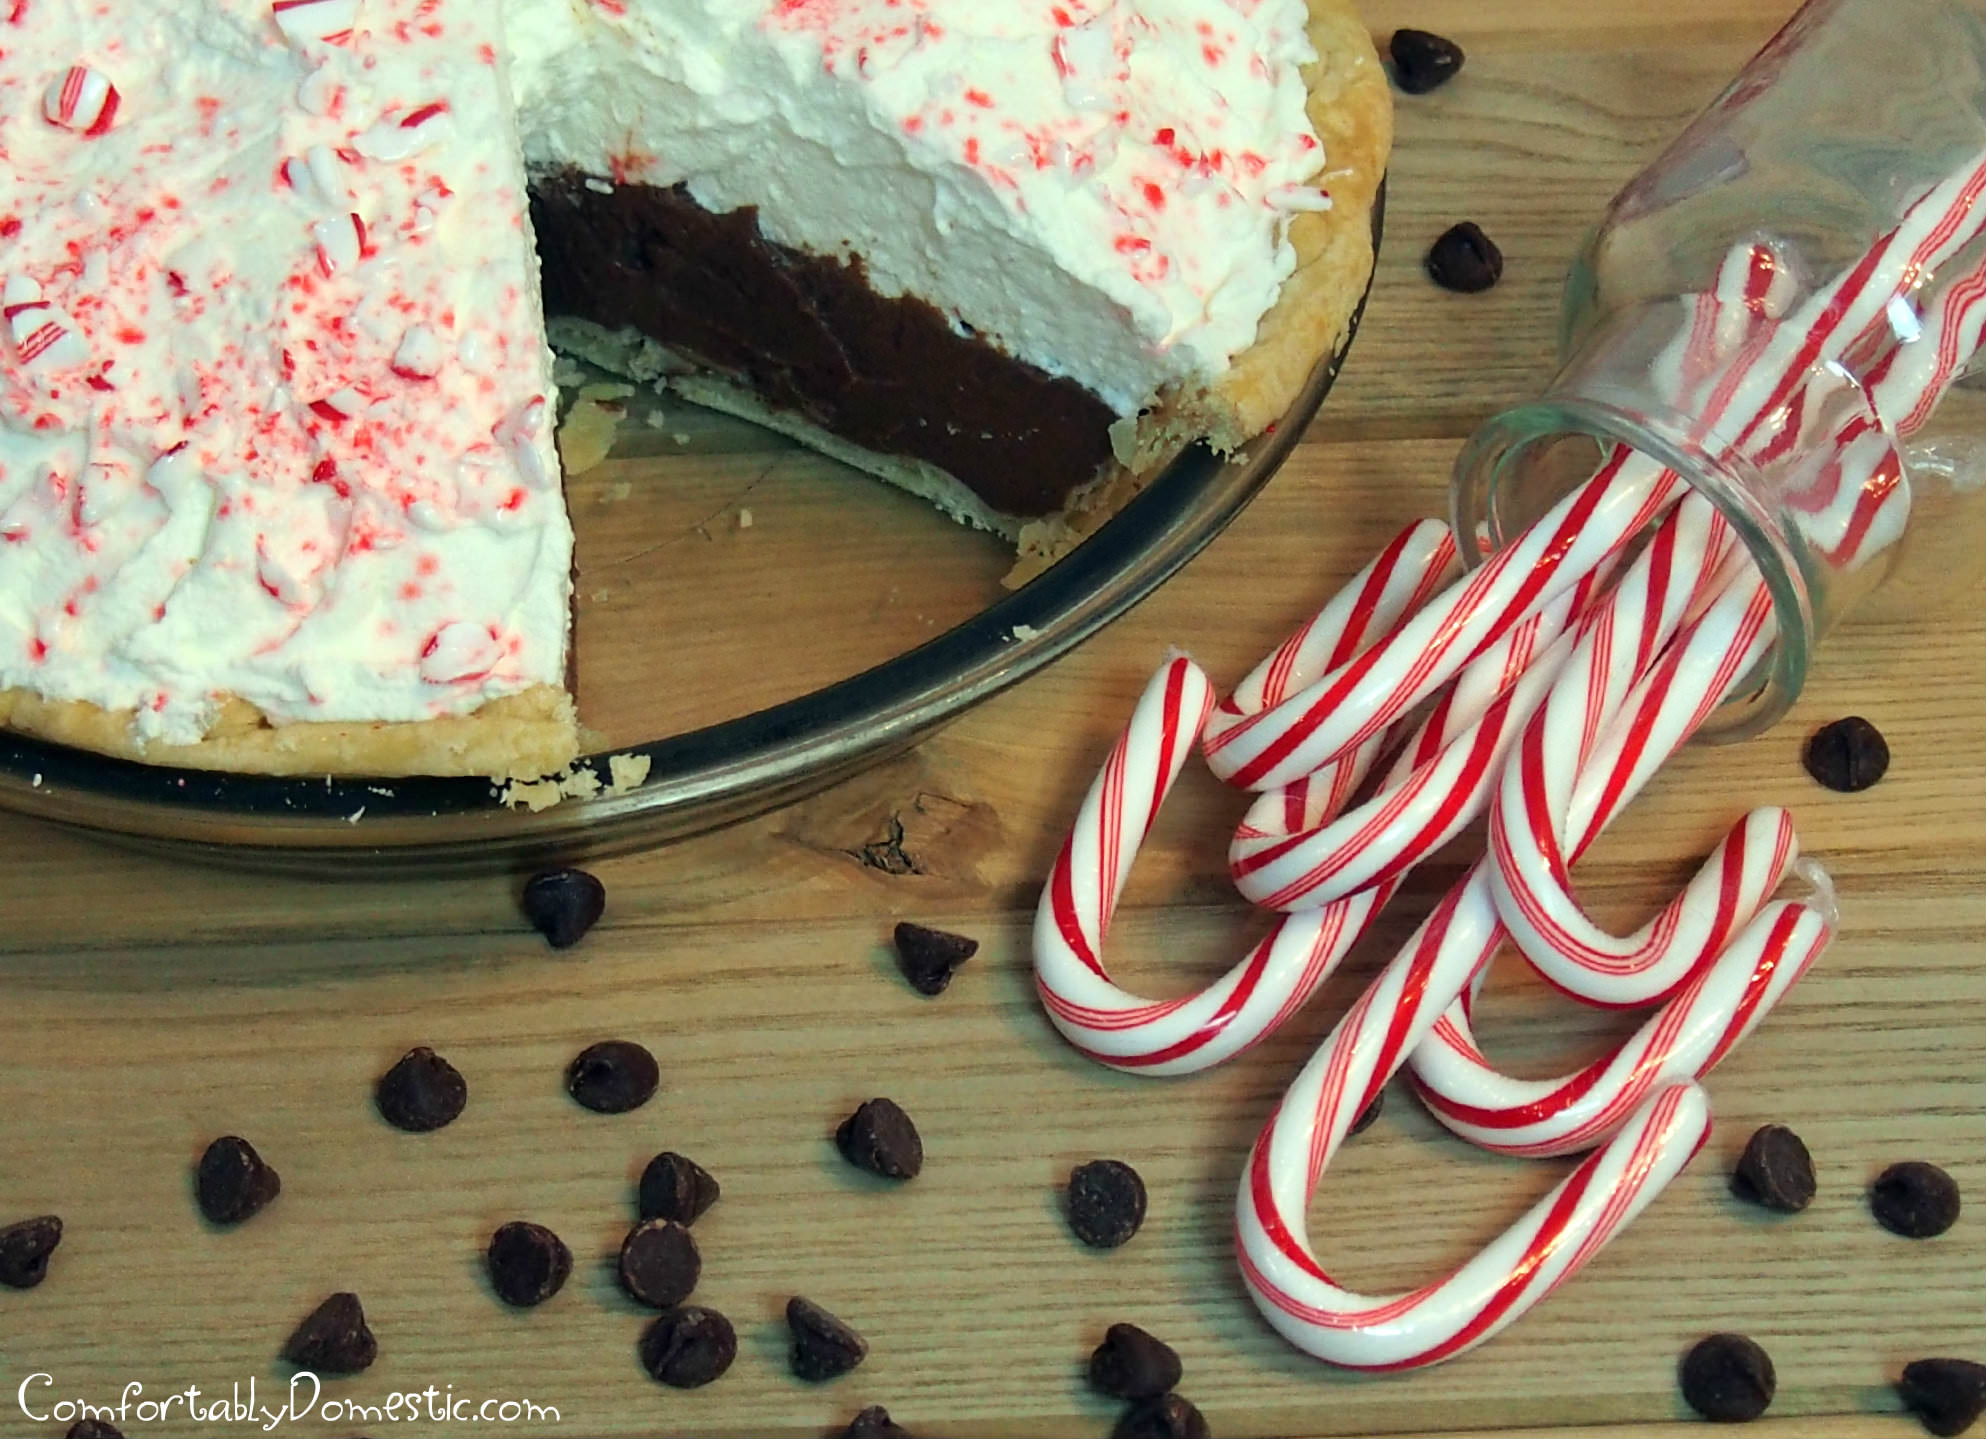 Chocolate Cream Pie with Peppermint Whipped Cream | ComfortablyDomestic.com